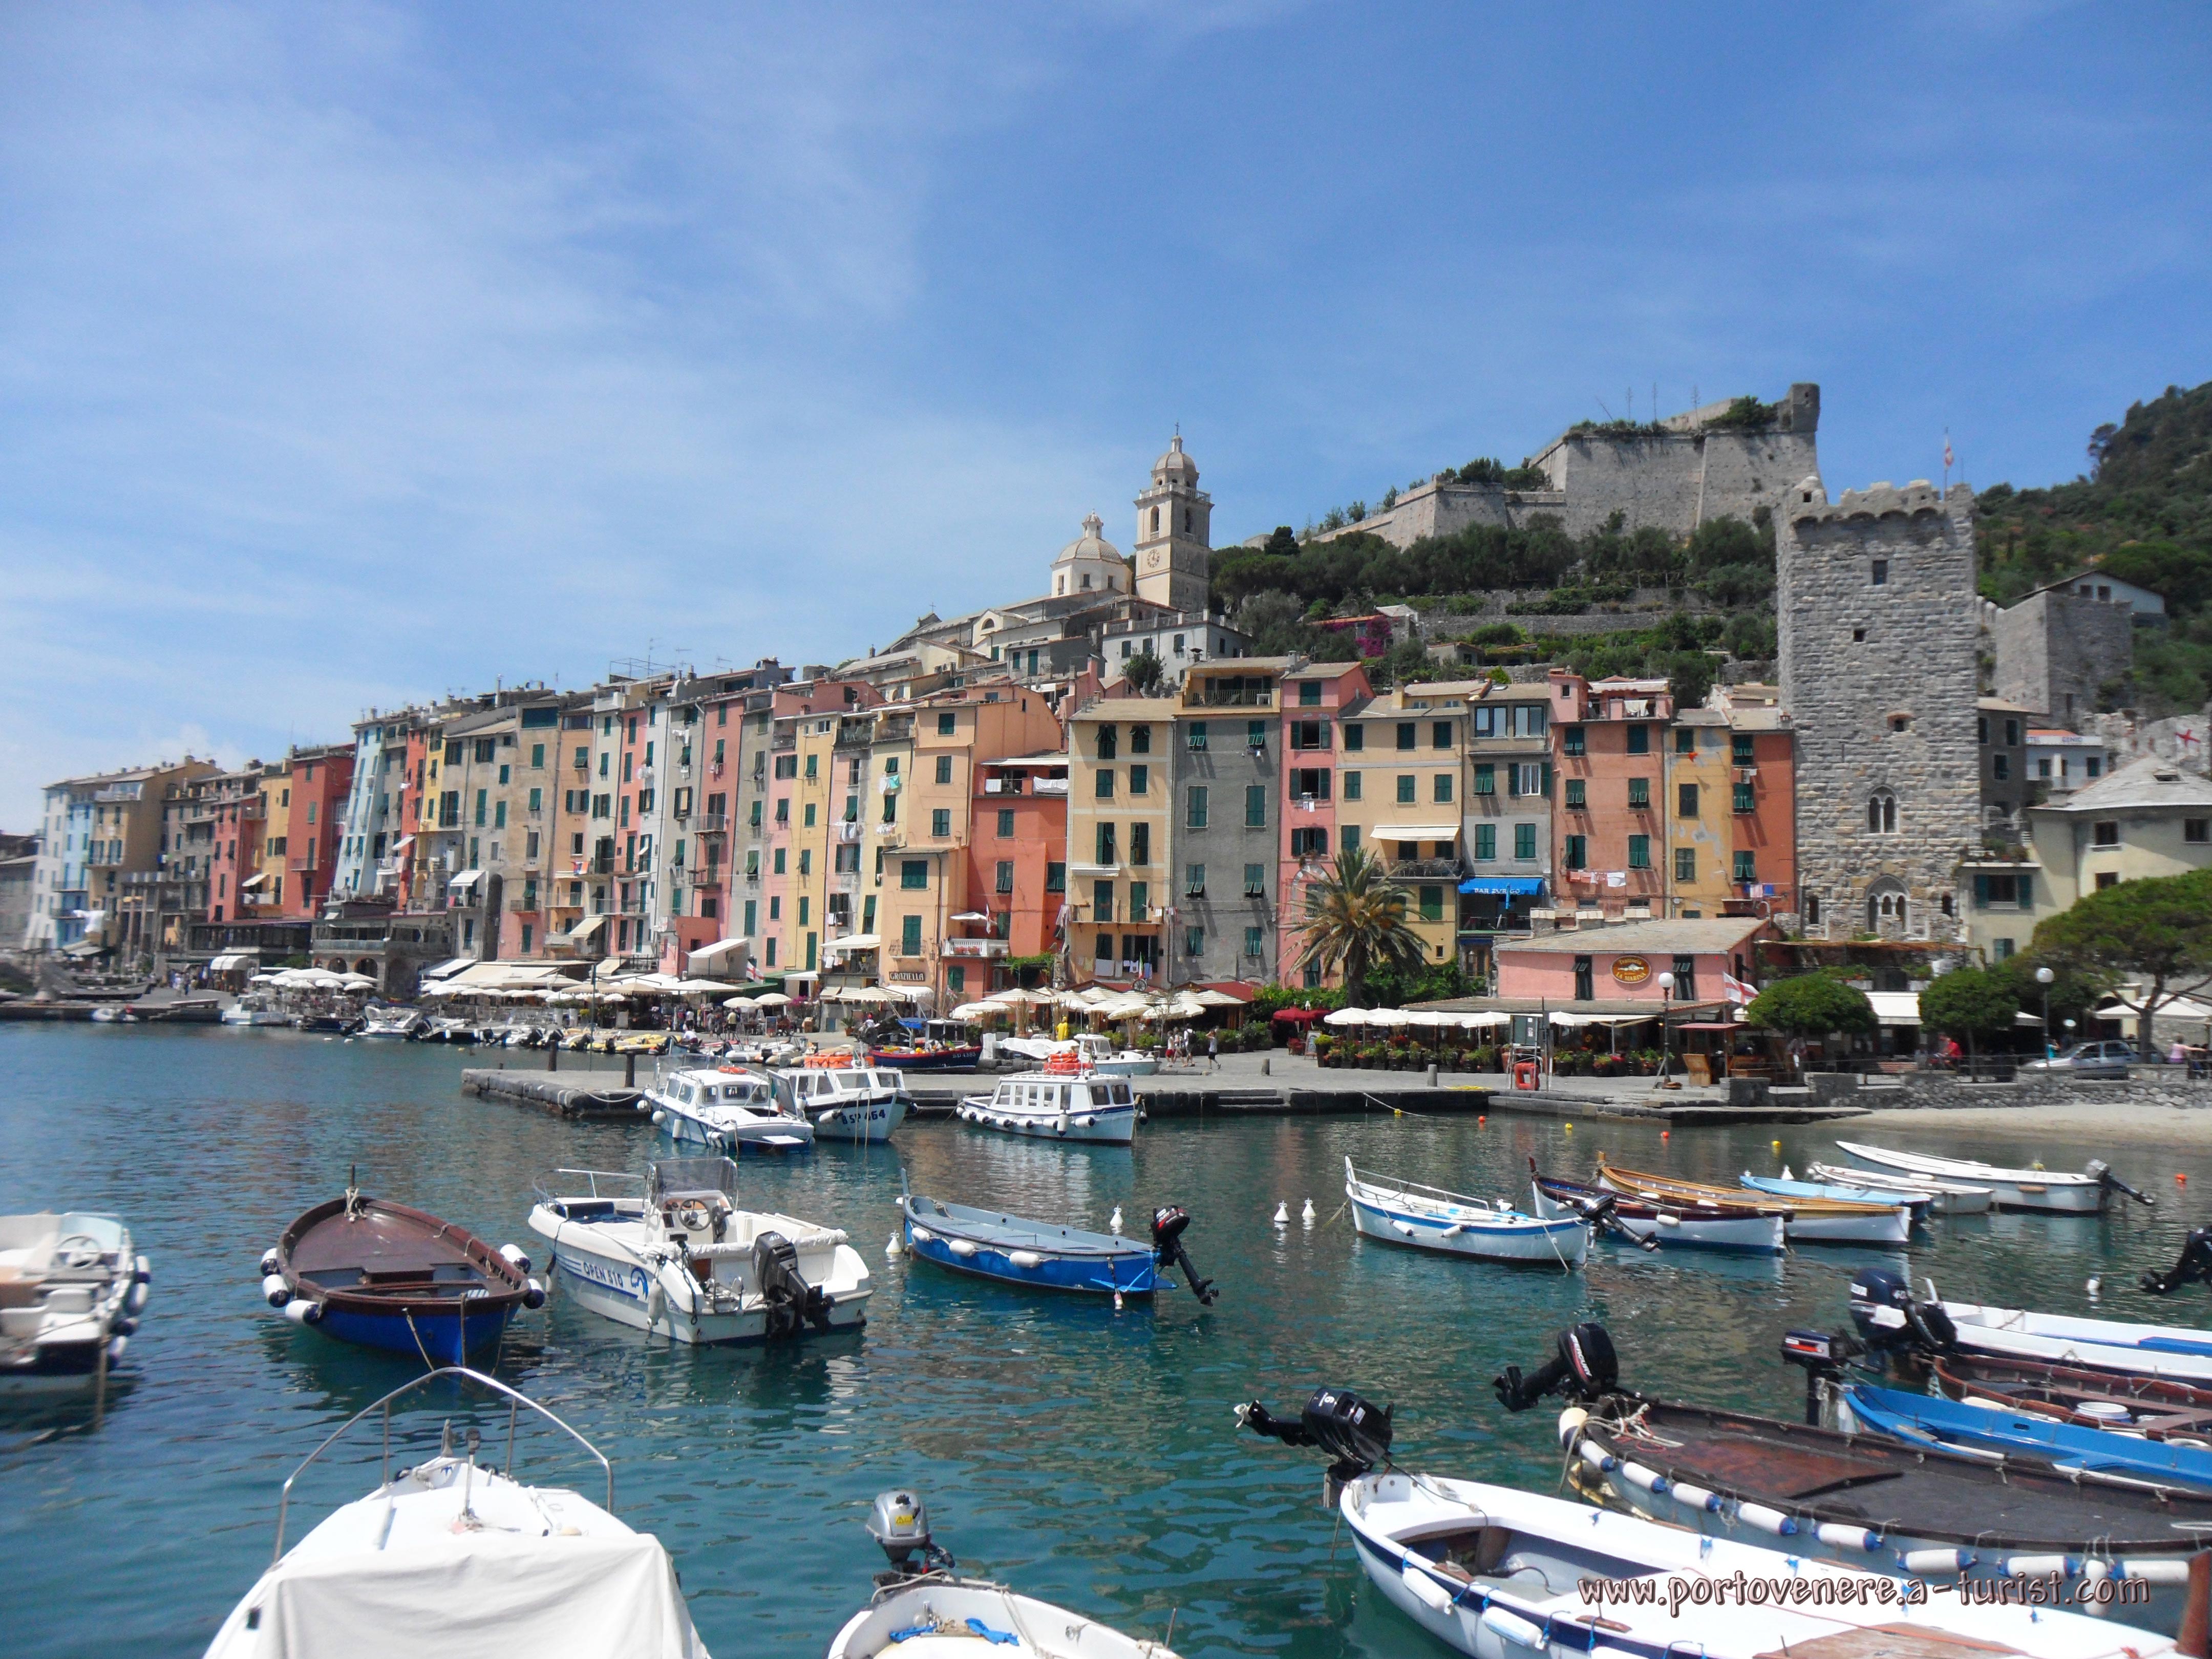 Portovenere - View of the town and castle Doria<br>4320x3240, 1.66 MB